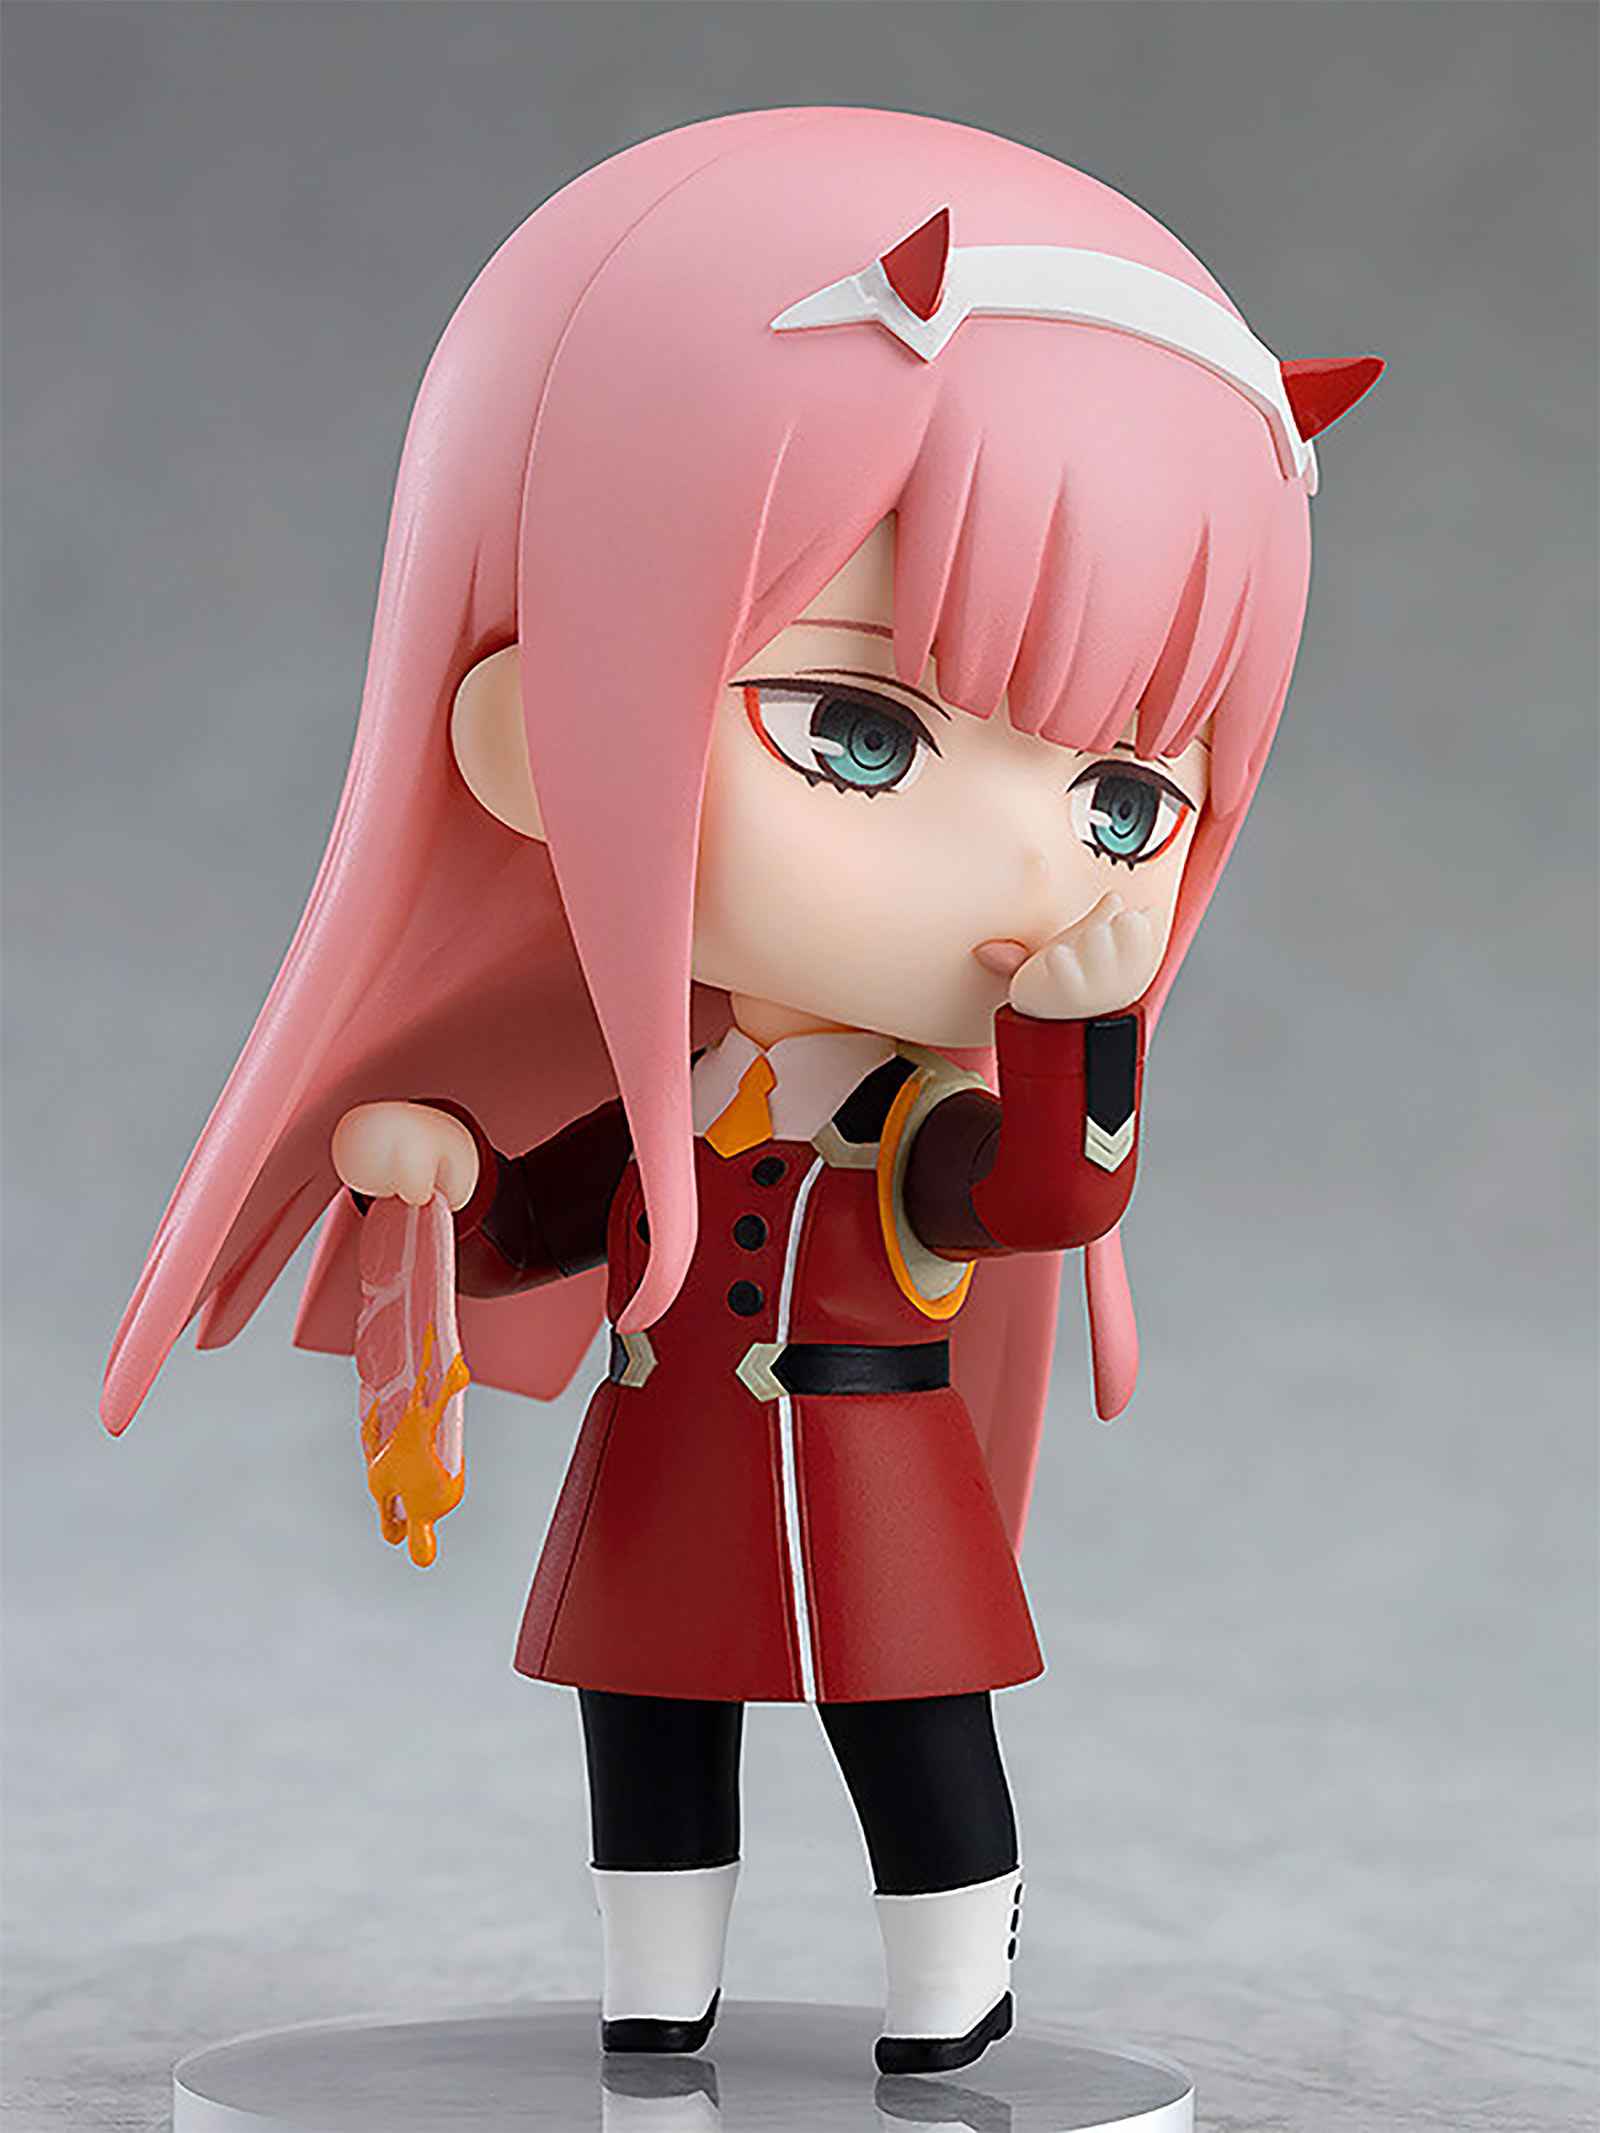 DARLING in the FRANXX - Zero Two Nendoroid Actionfigur